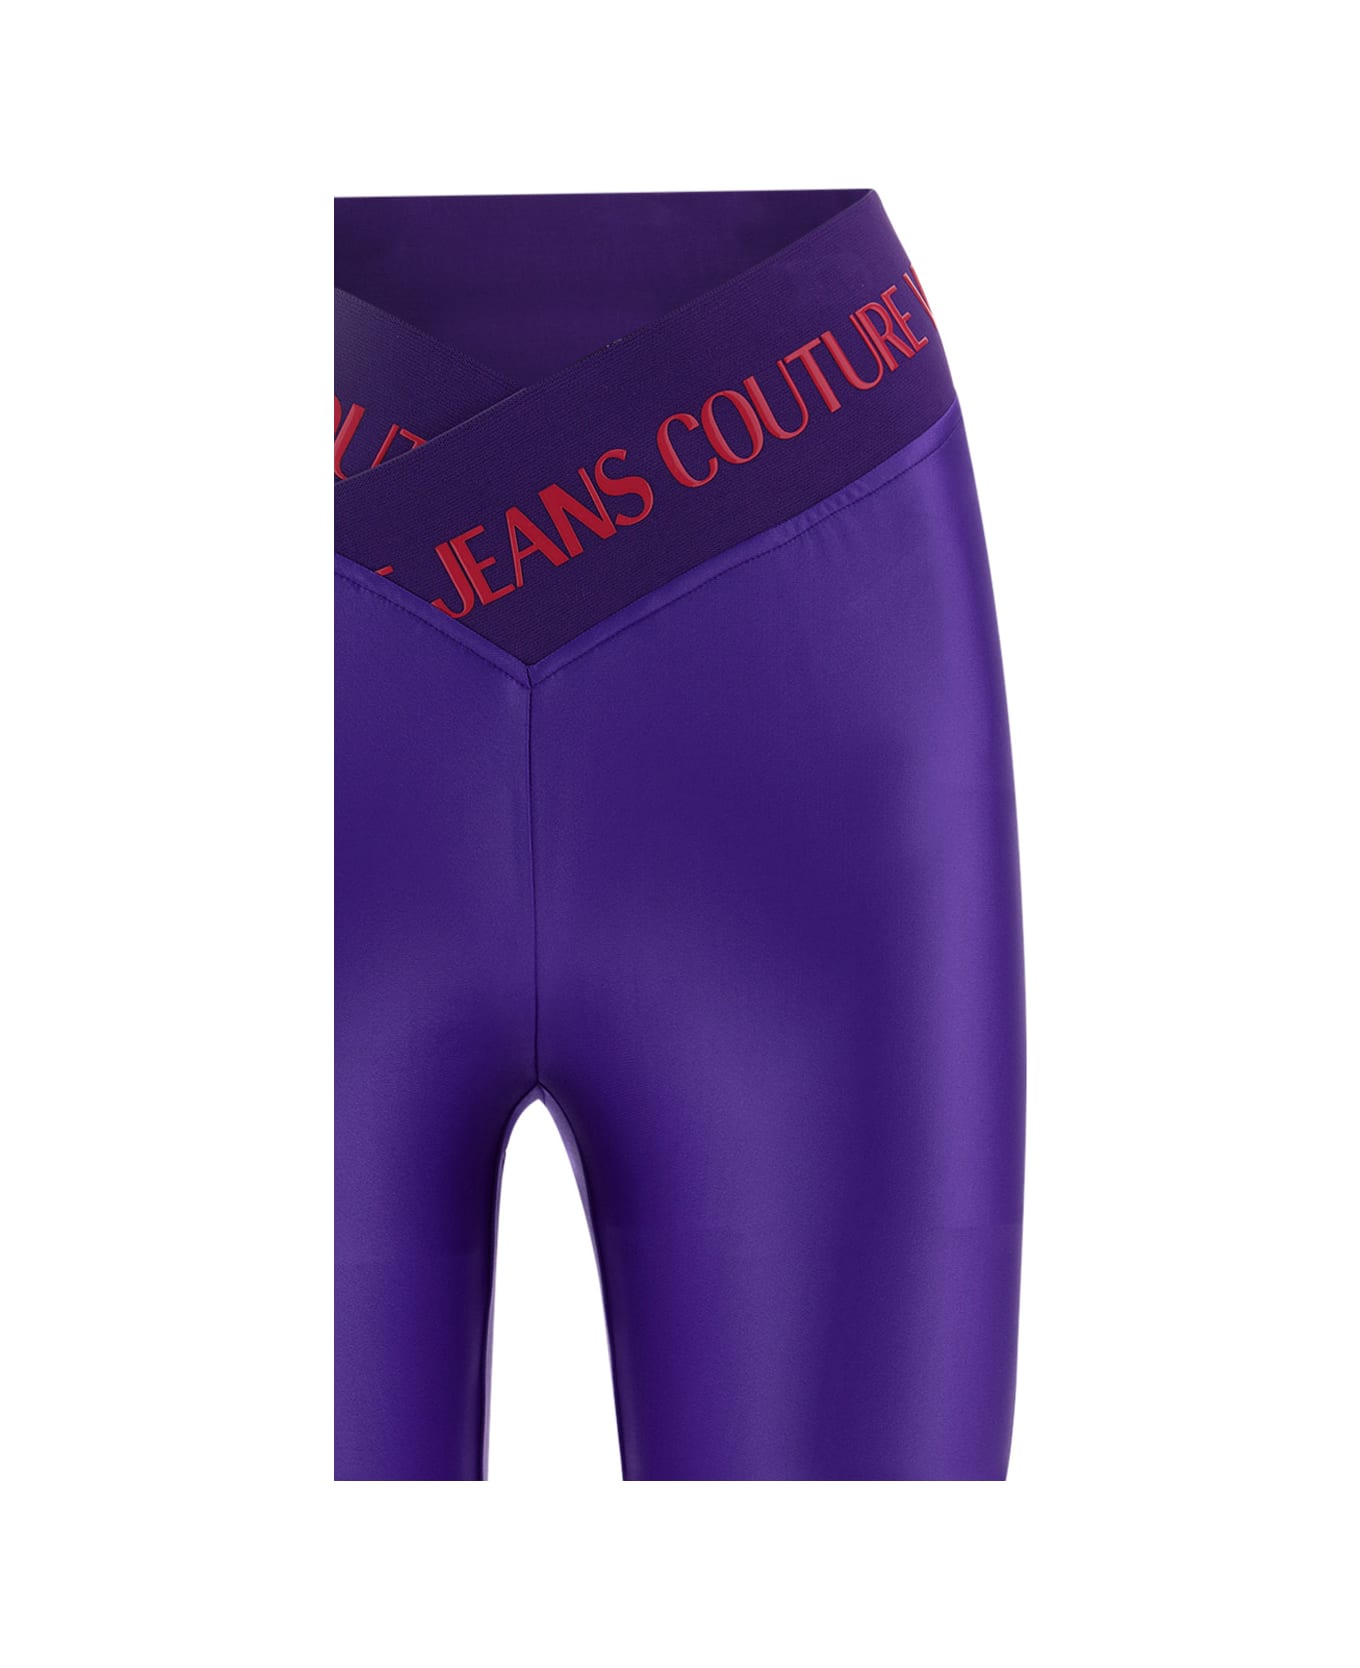 Versace Jeans Couture Leggings - Violet レギンス